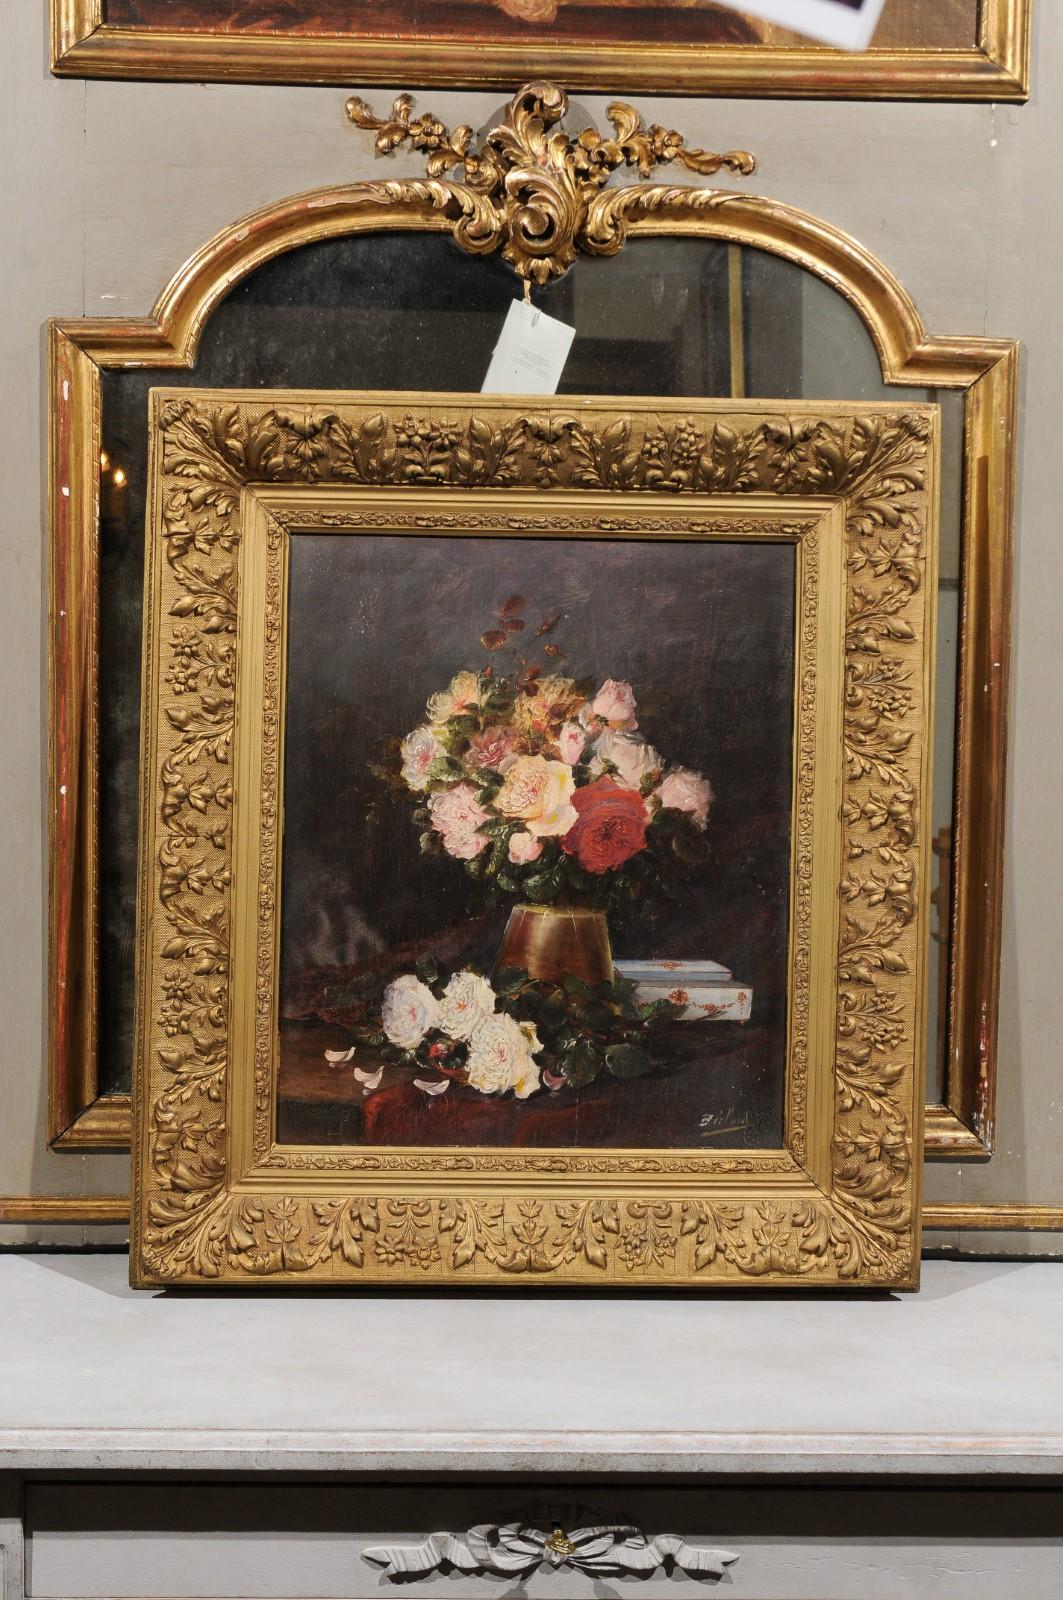 A French floral still-life painting from the 19th century in original frame. Born in France during the politically dynamic 19th century, this exquisite painting features a lovely bouquet of pink, red and yellow roses displayed in a copper-hued vase,